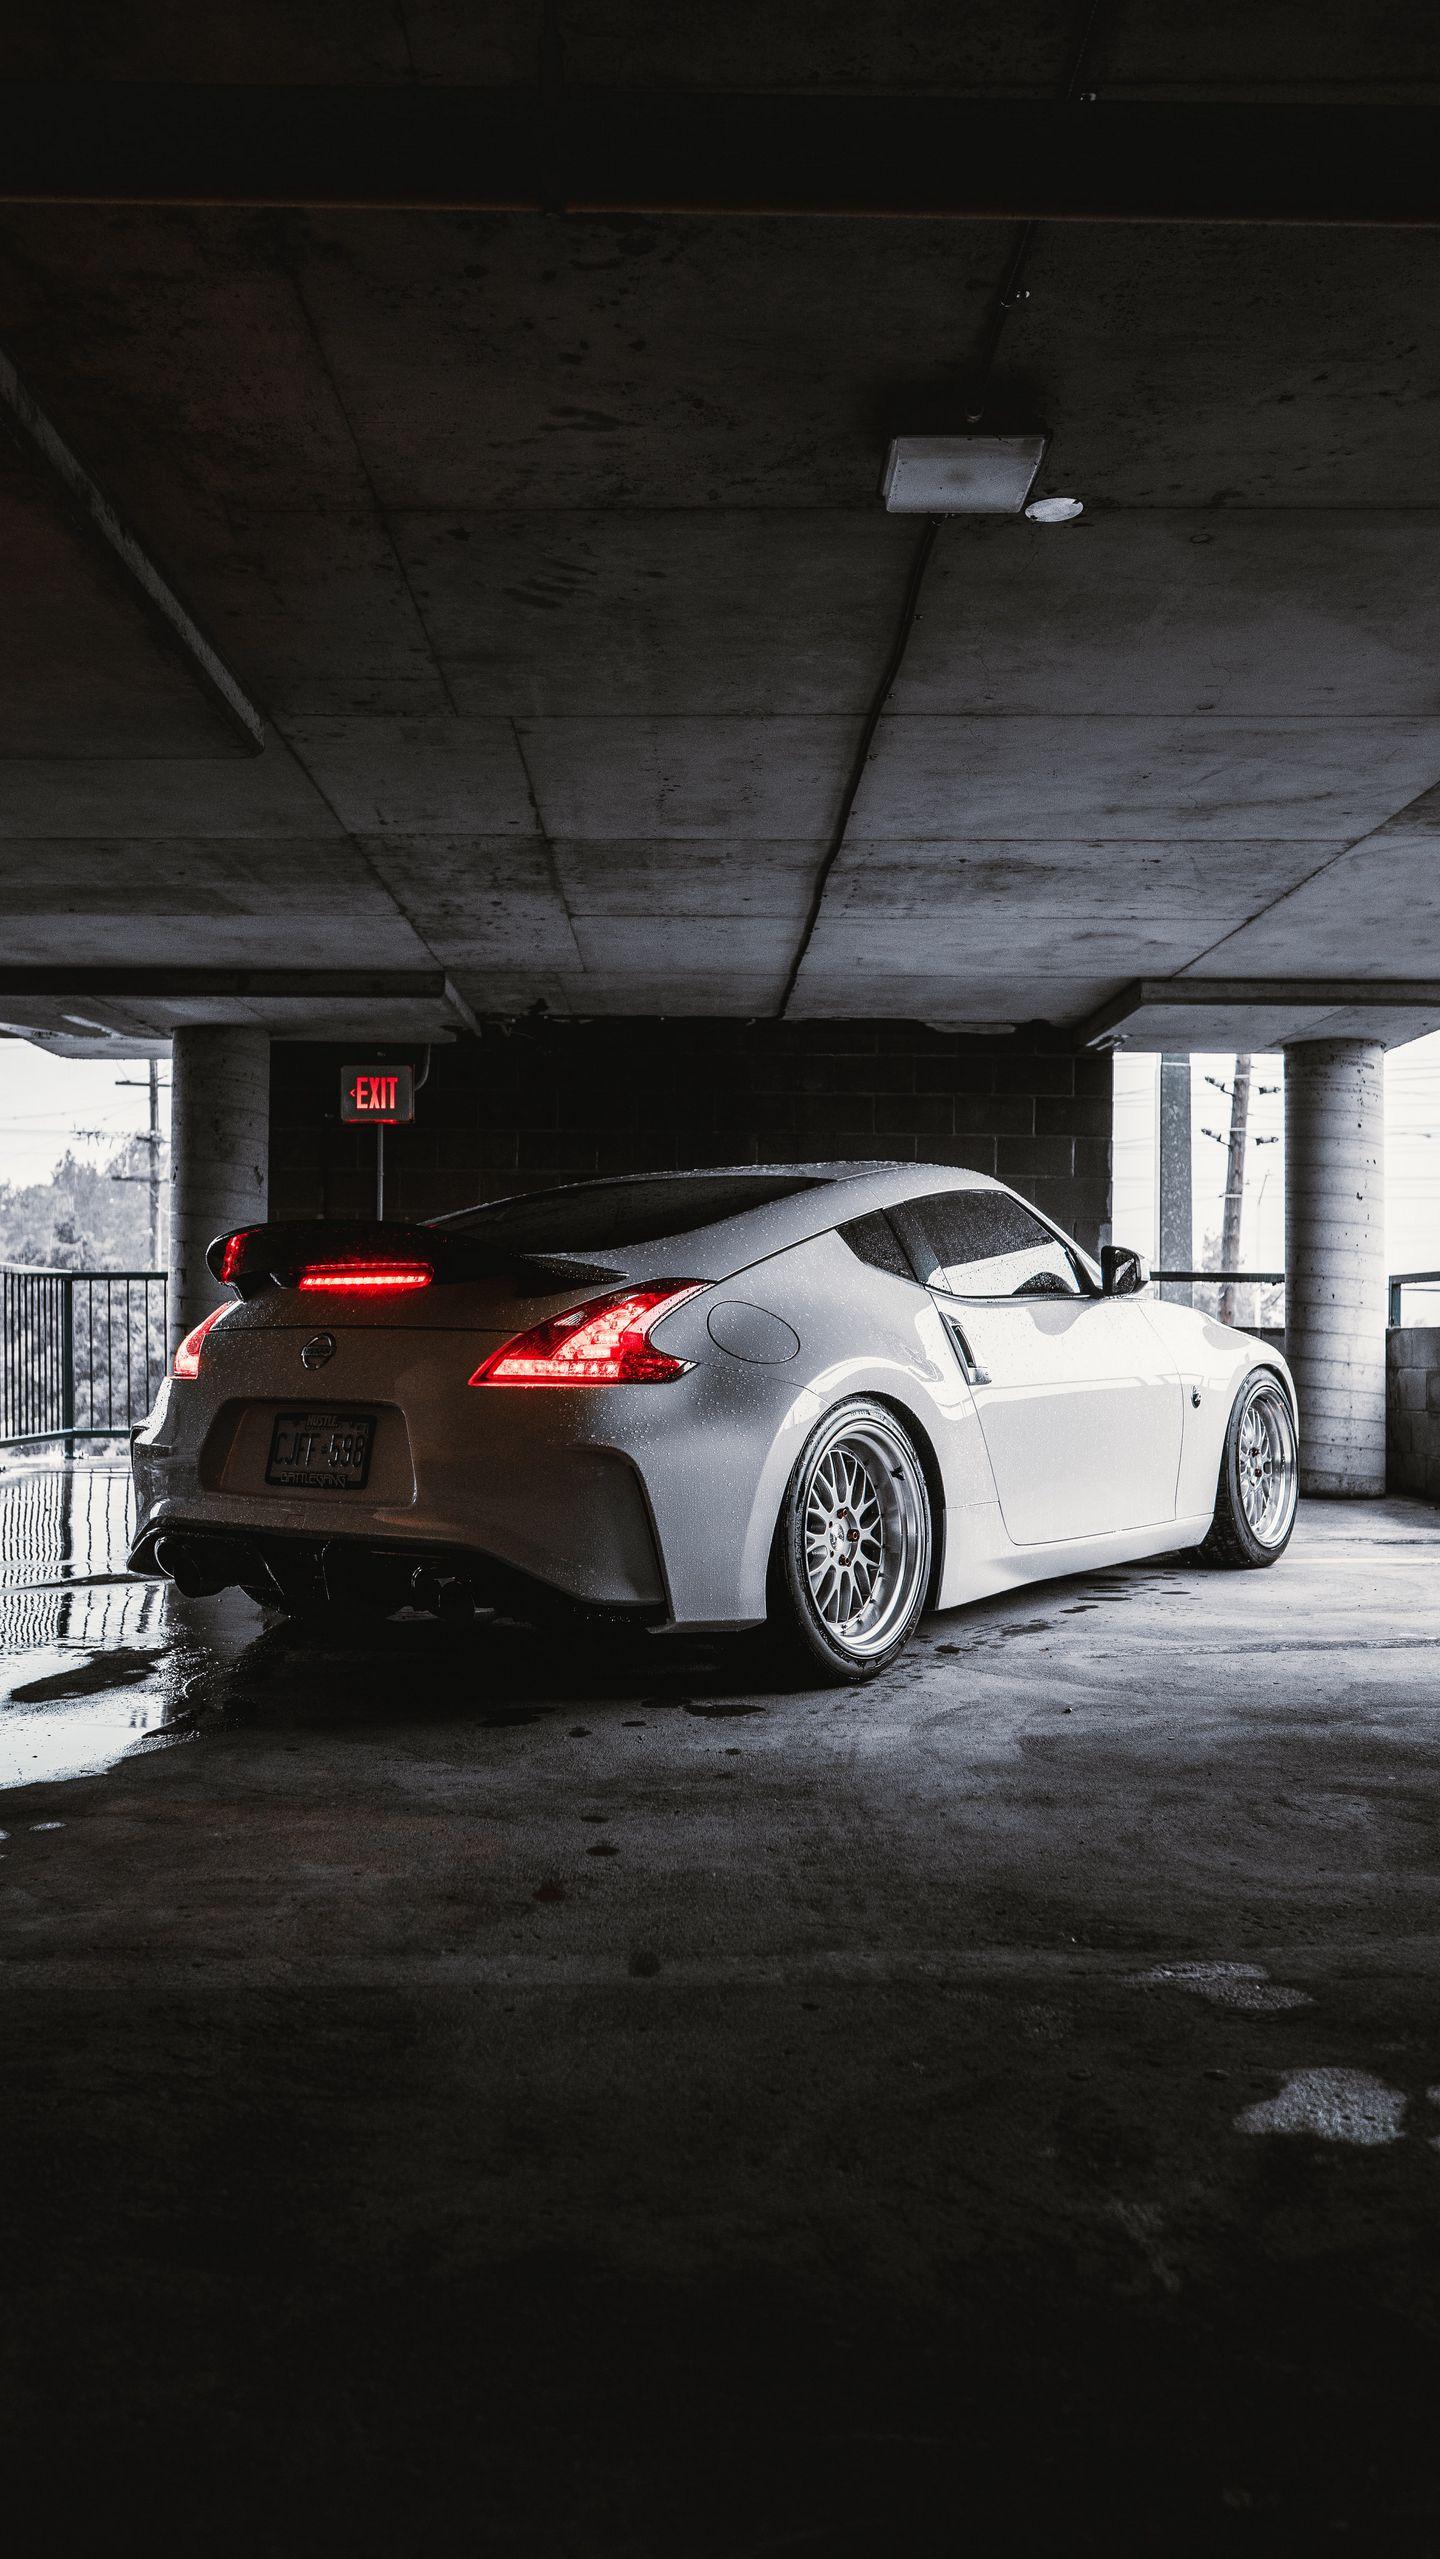 Download wallpaper 2560x1440 nissan 370z, nissan, car, gray, tuning, road  widescreen 16:9 hd background